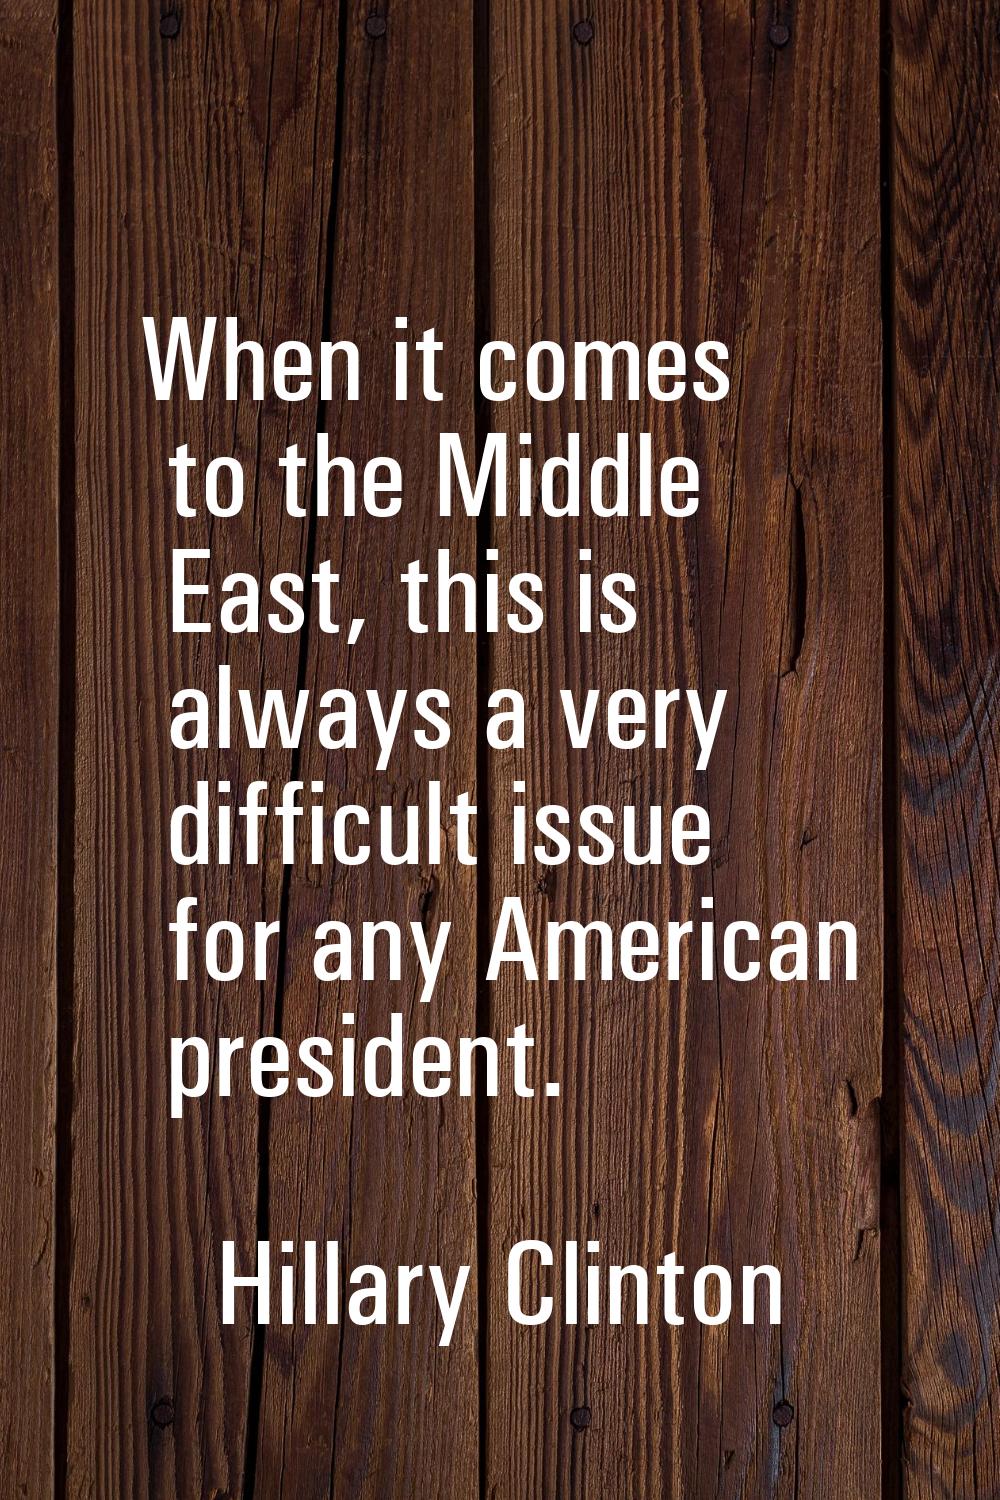 When it comes to the Middle East, this is always a very difficult issue for any American president.